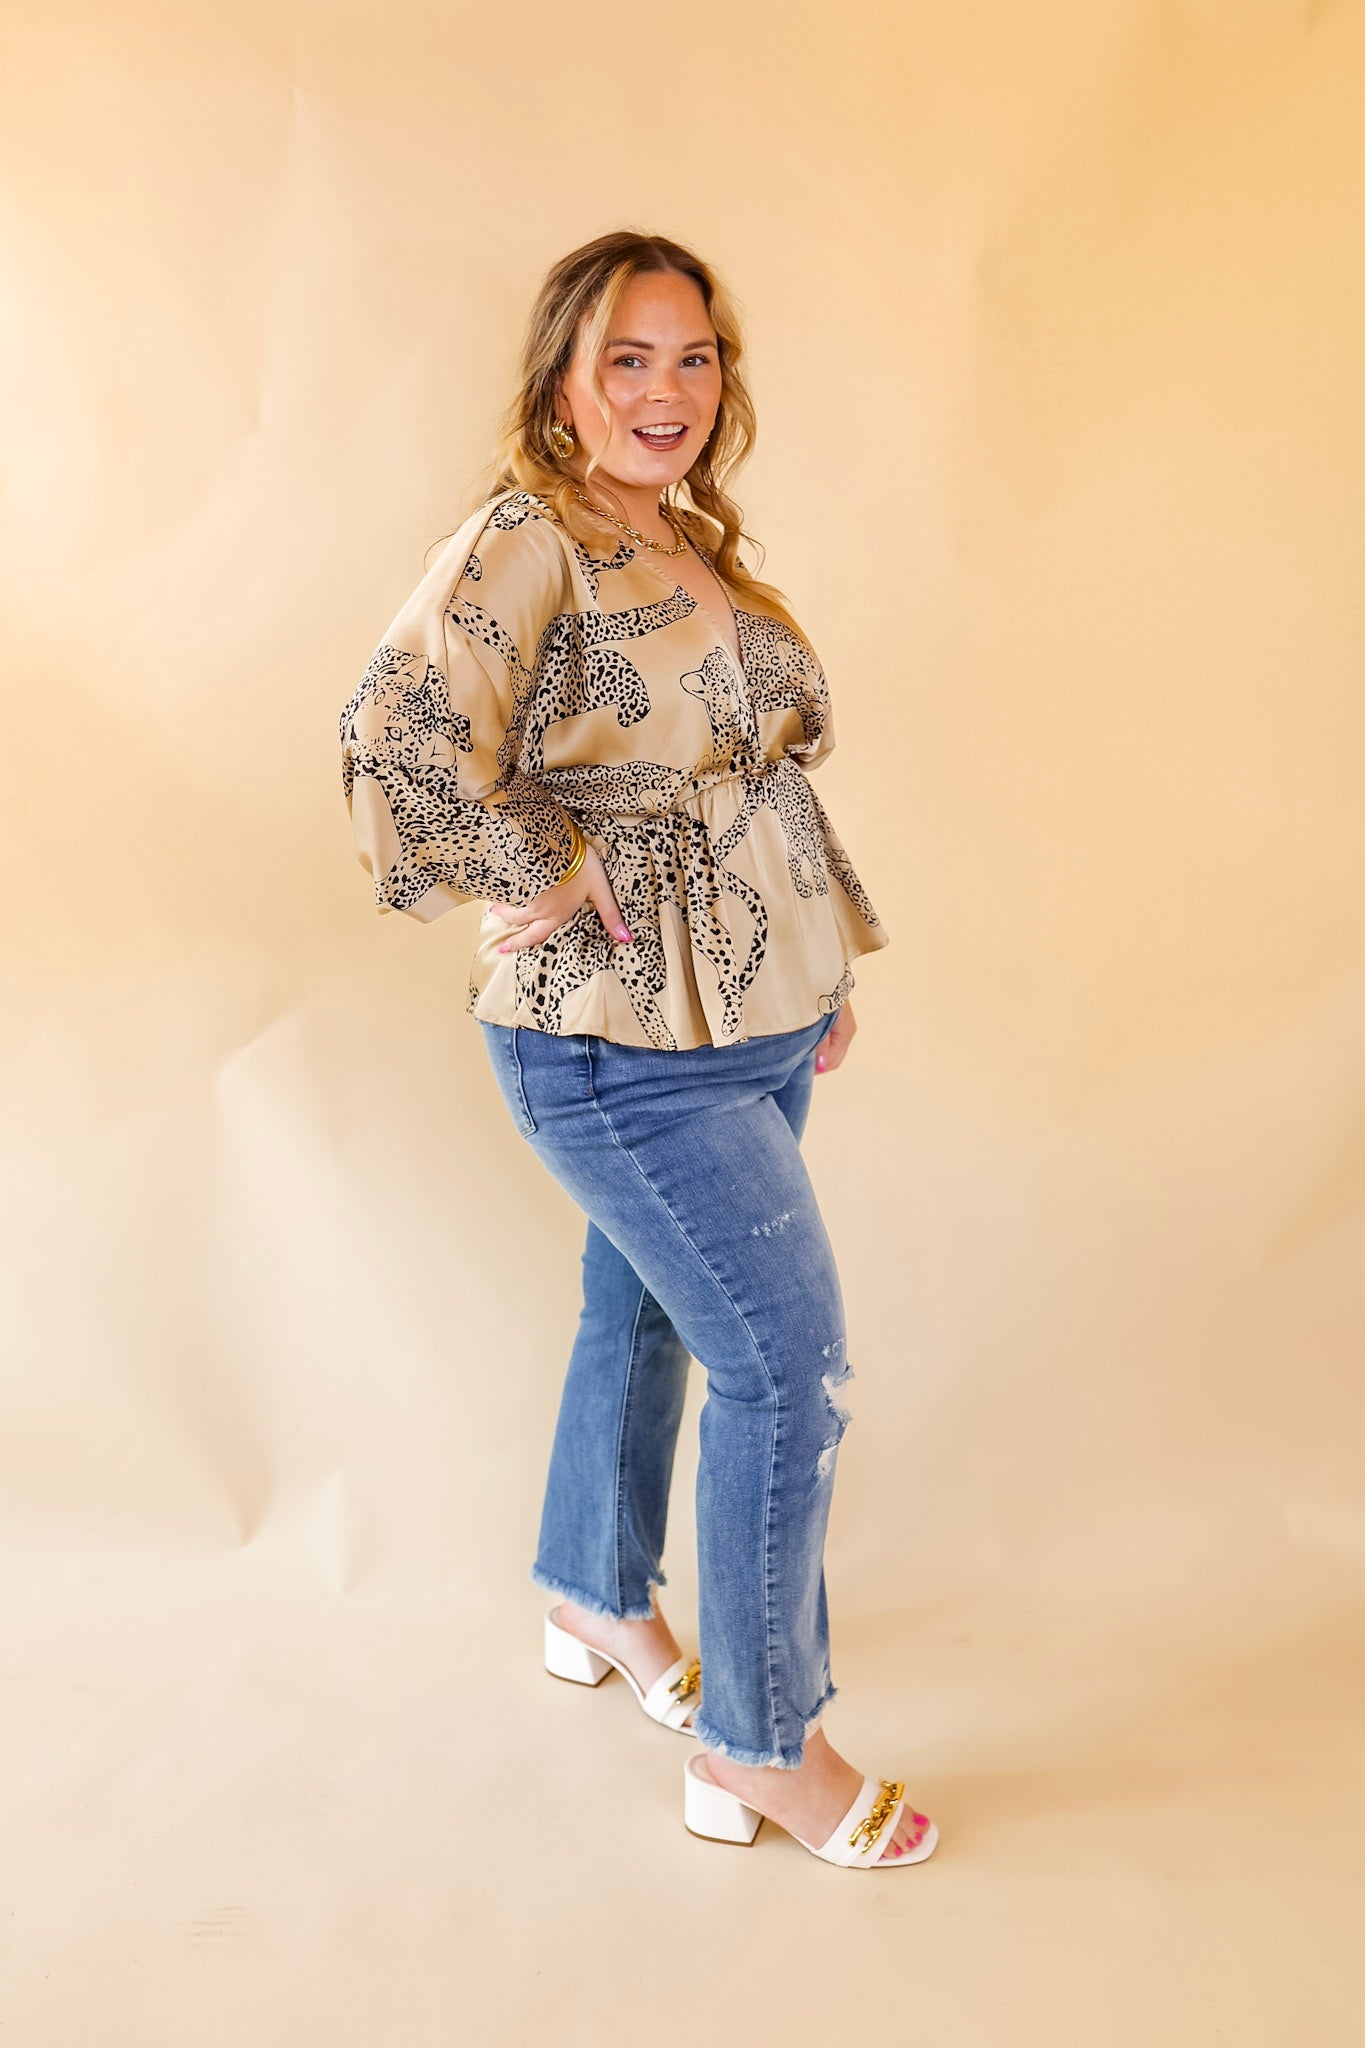 Central Ave Sweetness Leopard Print Peplum Top in Tan - Giddy Up Glamour Boutique